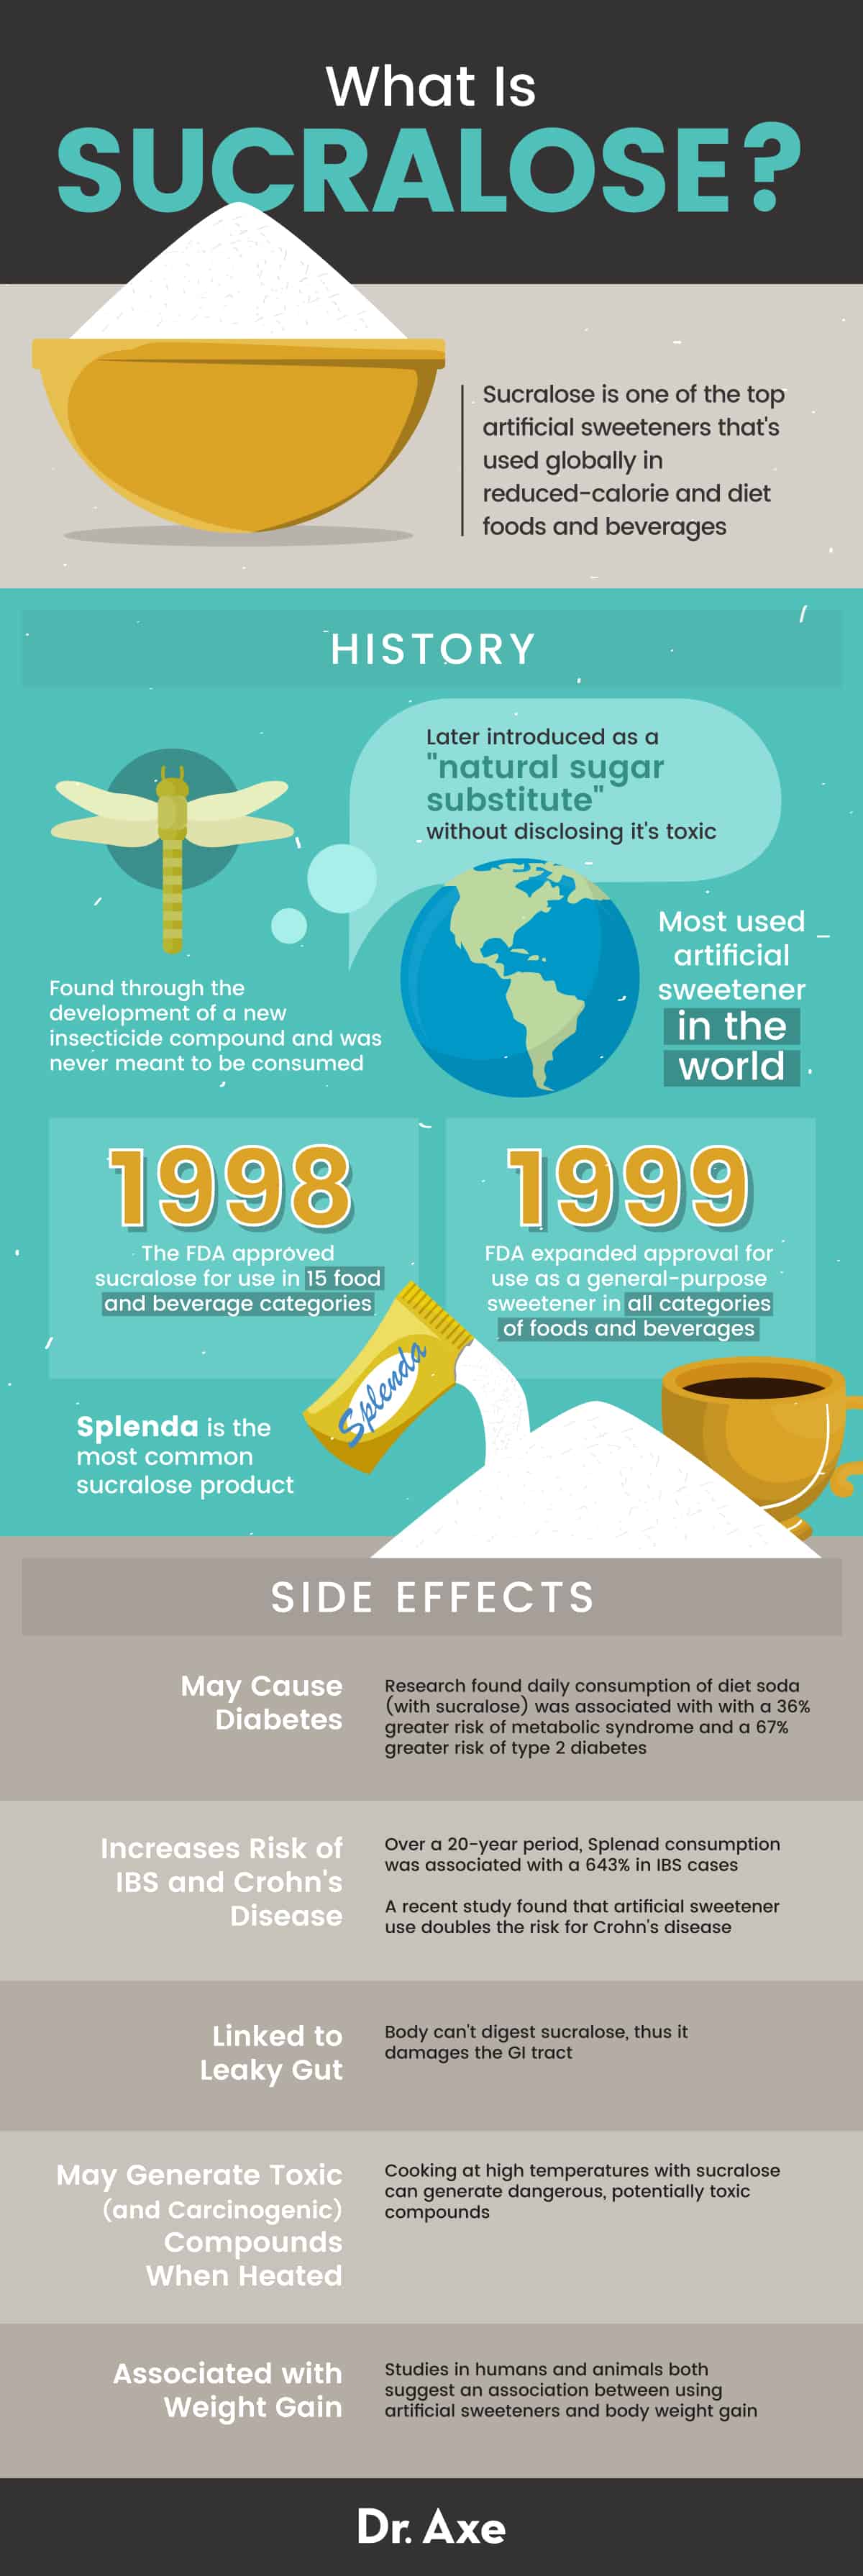 The Sucralose Infographic Courtesy of Dr. Axe